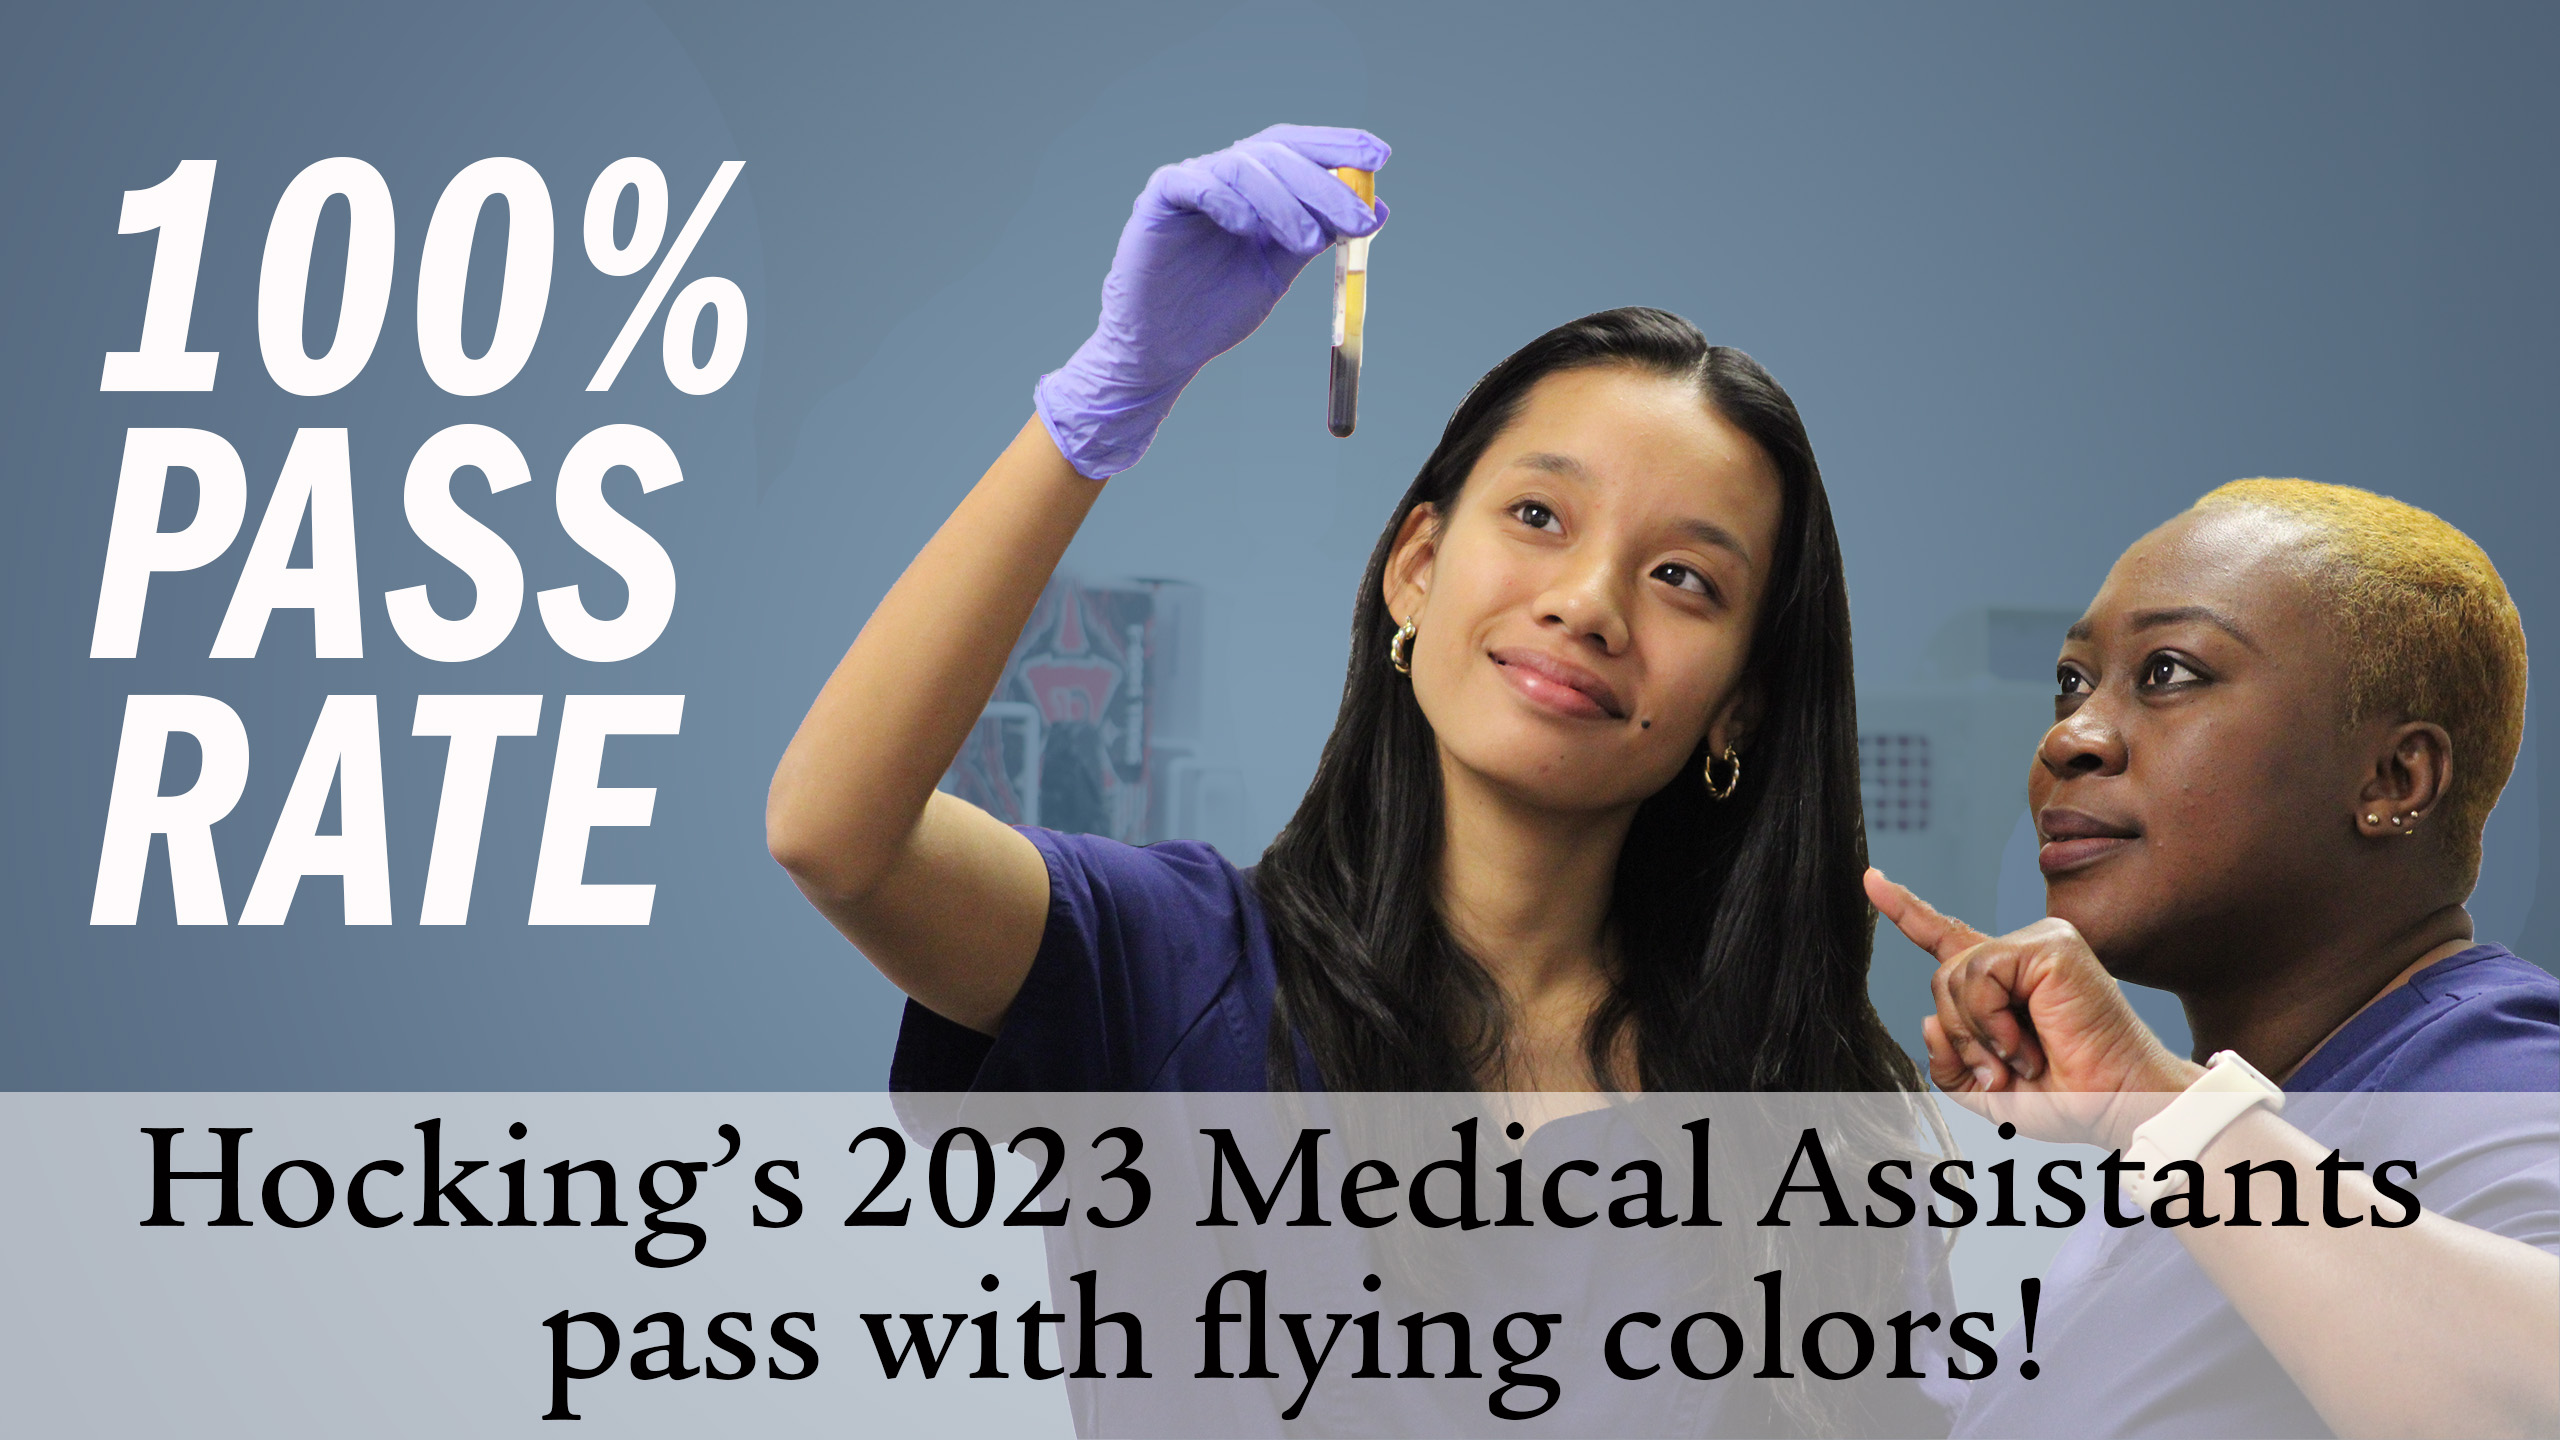 Hocking's 2023 Medical Assistants pass with flying colors